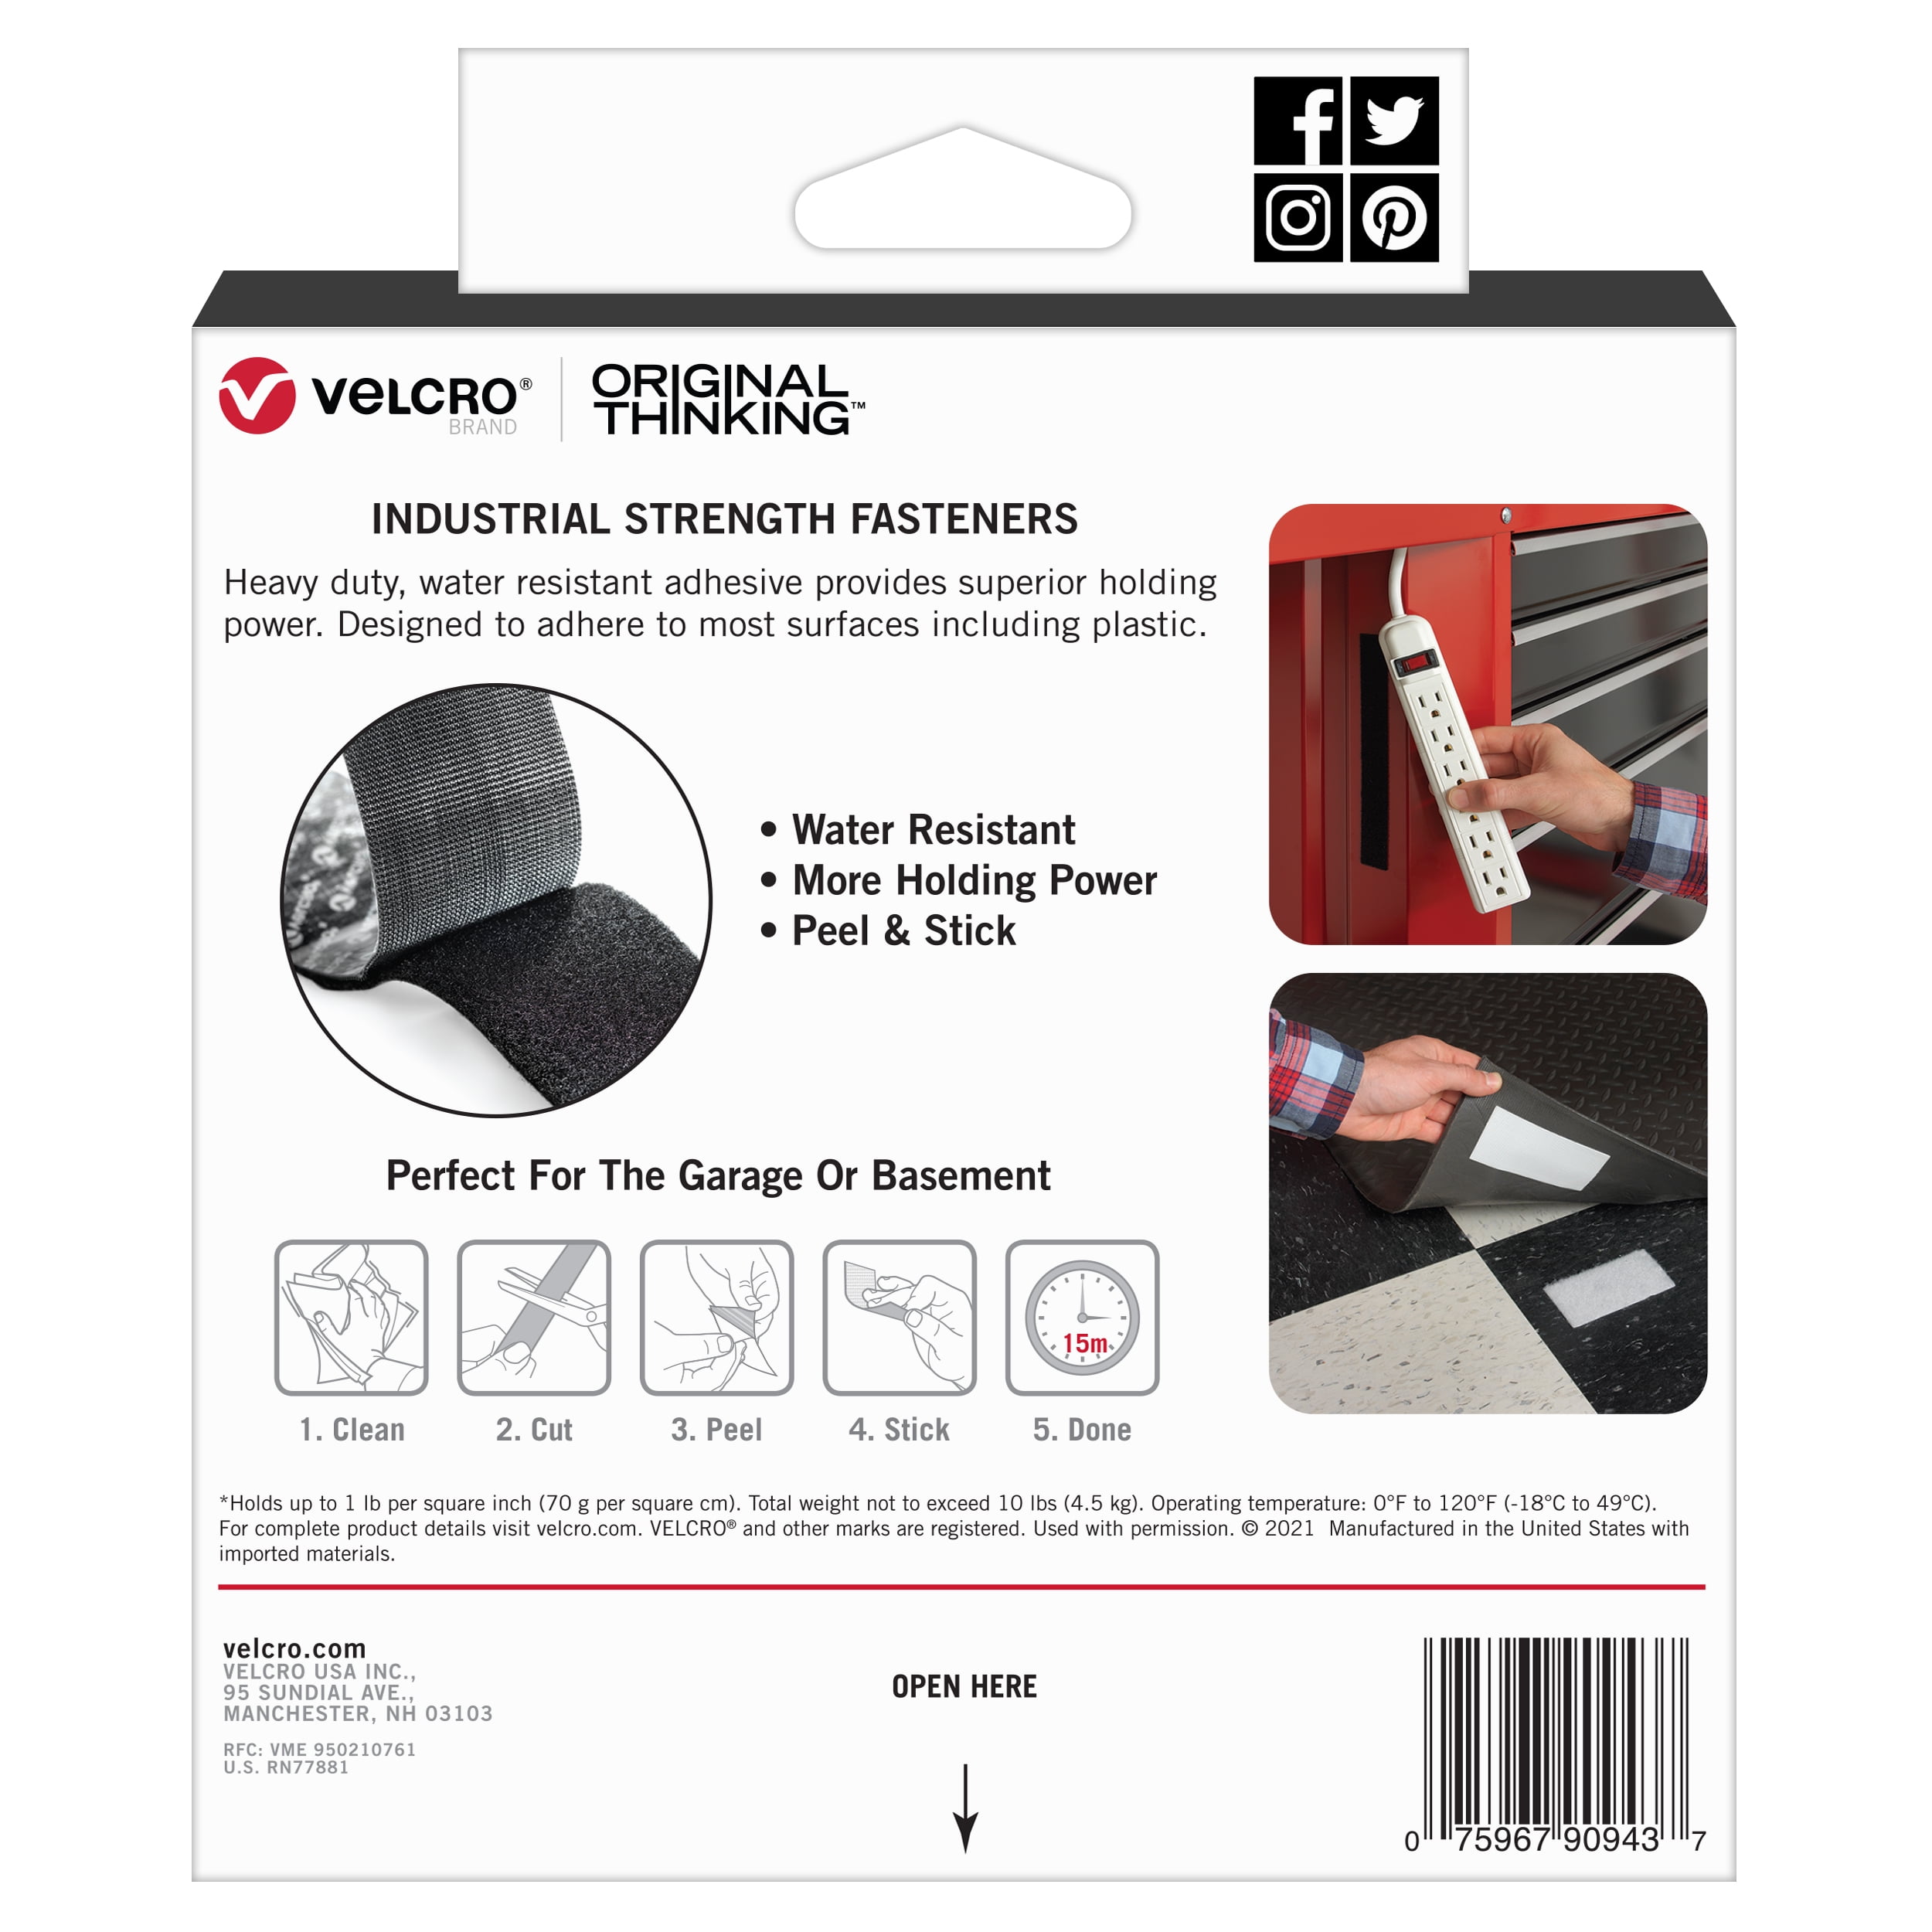 Velcro Industrial Adhesive Tape, 10' x 2'', Black, Holds 10 lbs (4.5Kg)